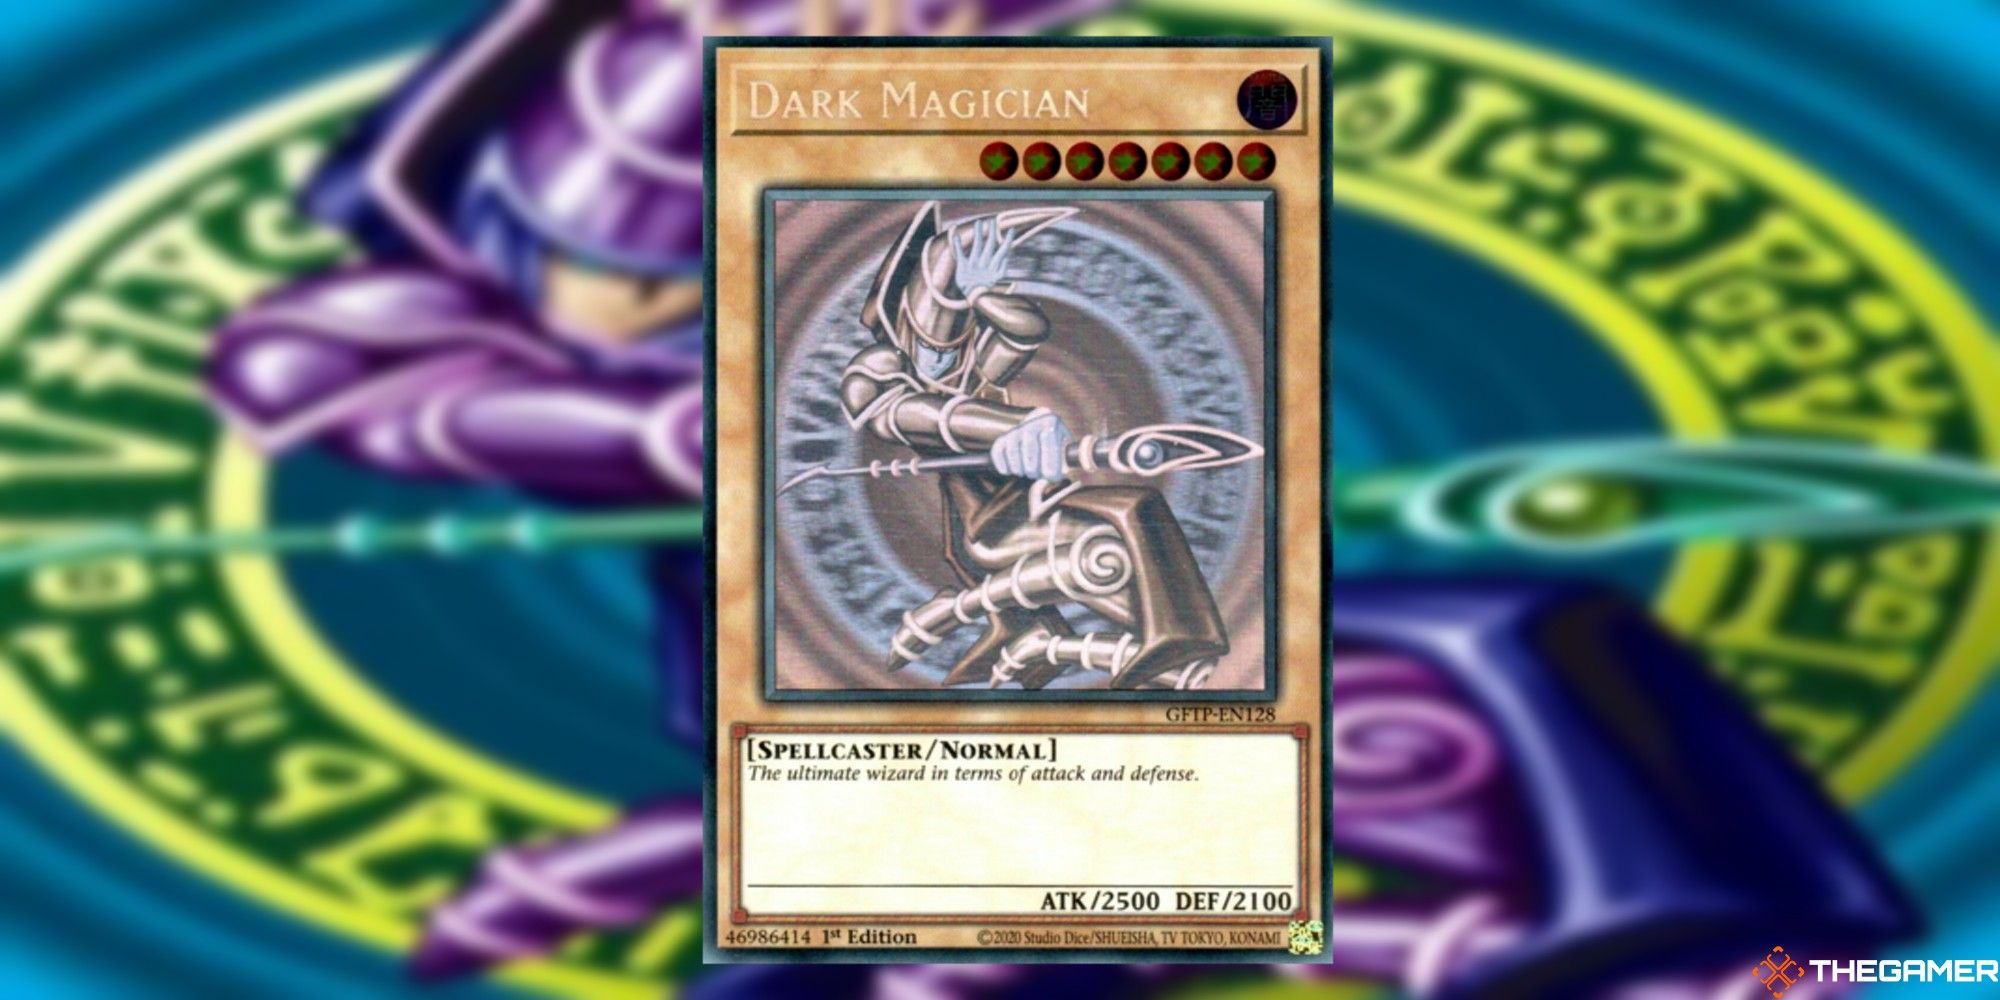 dark magician card and art background